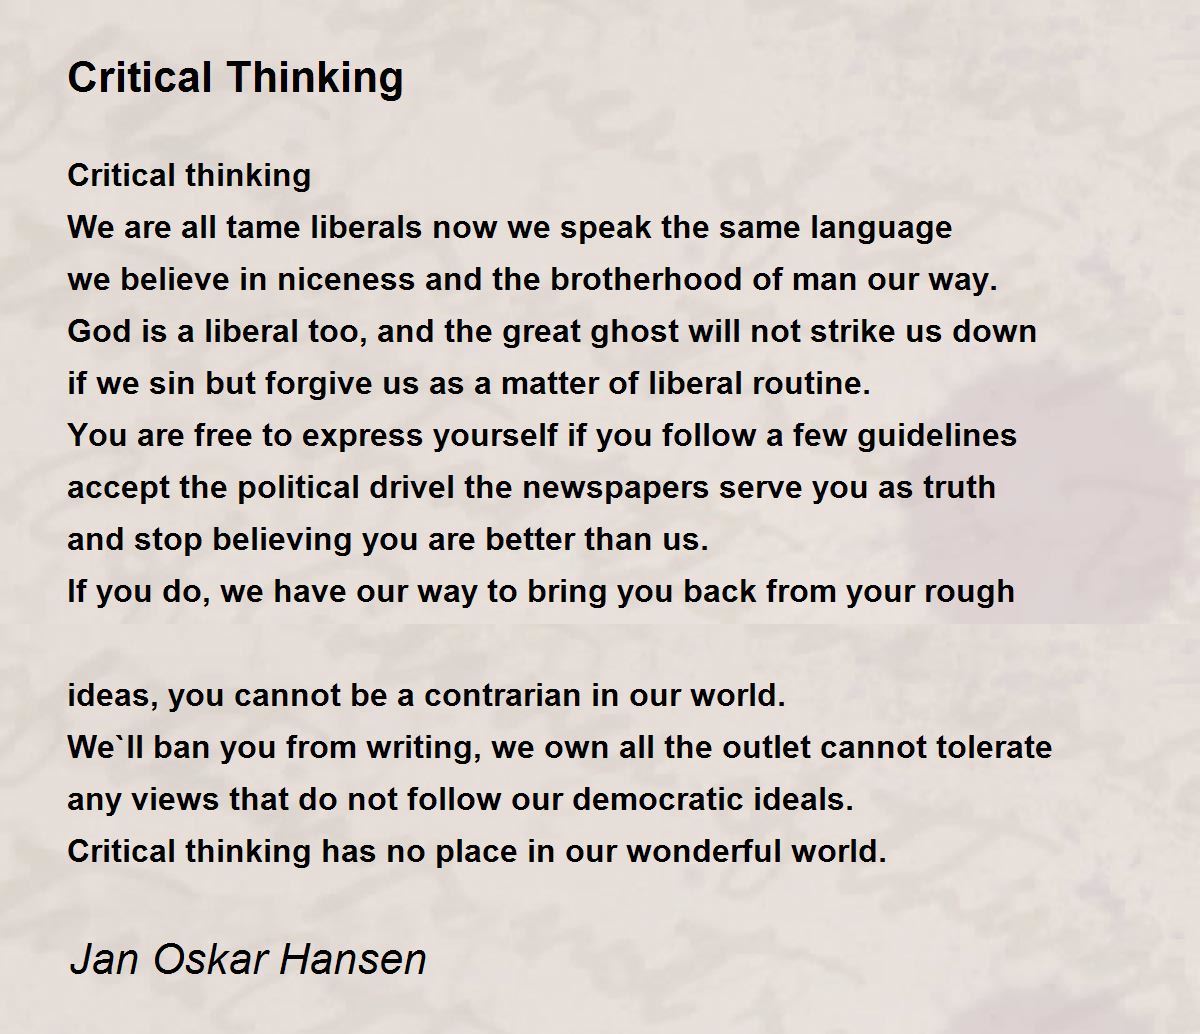 critical thinking poems